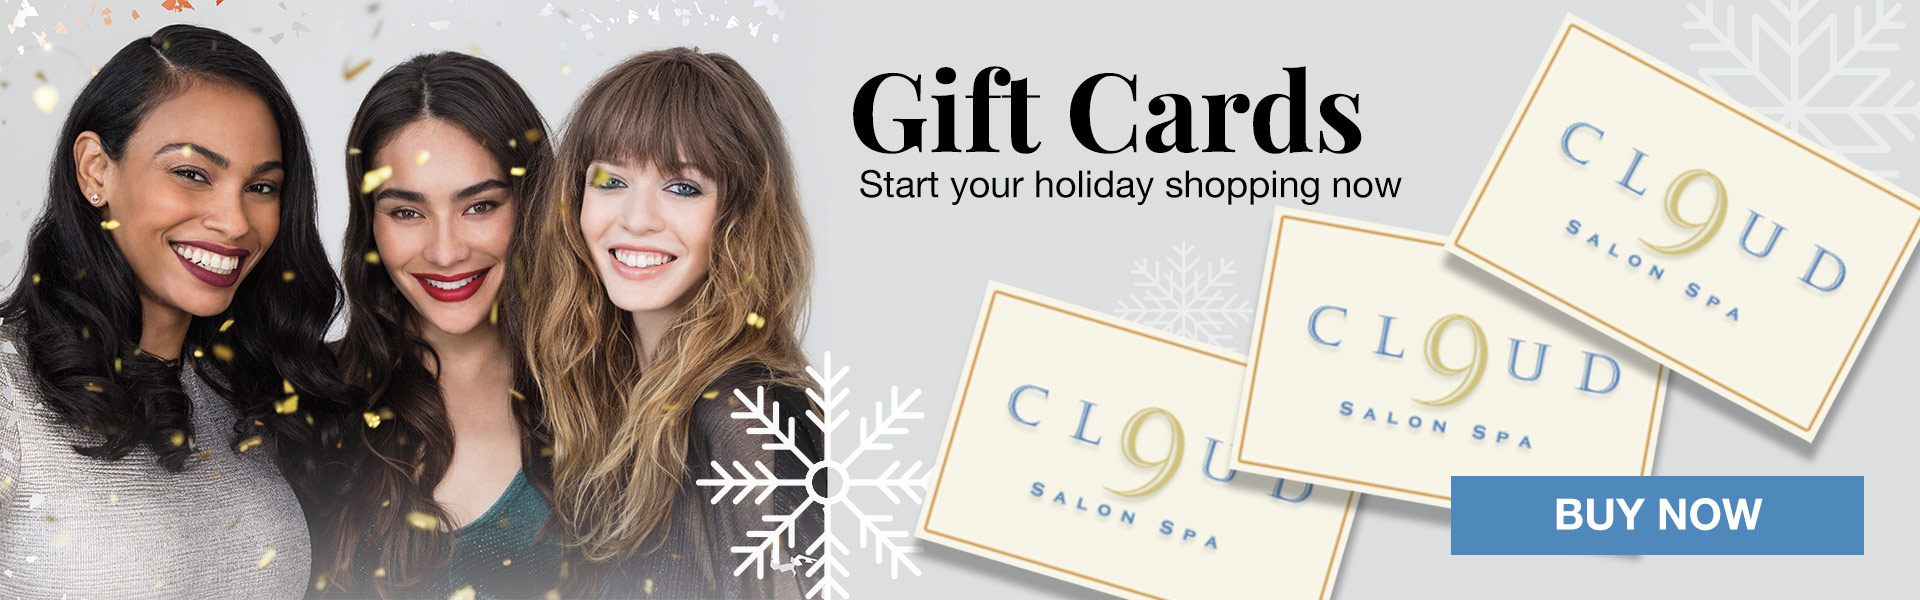 Gift cards holiday sale salon and spa